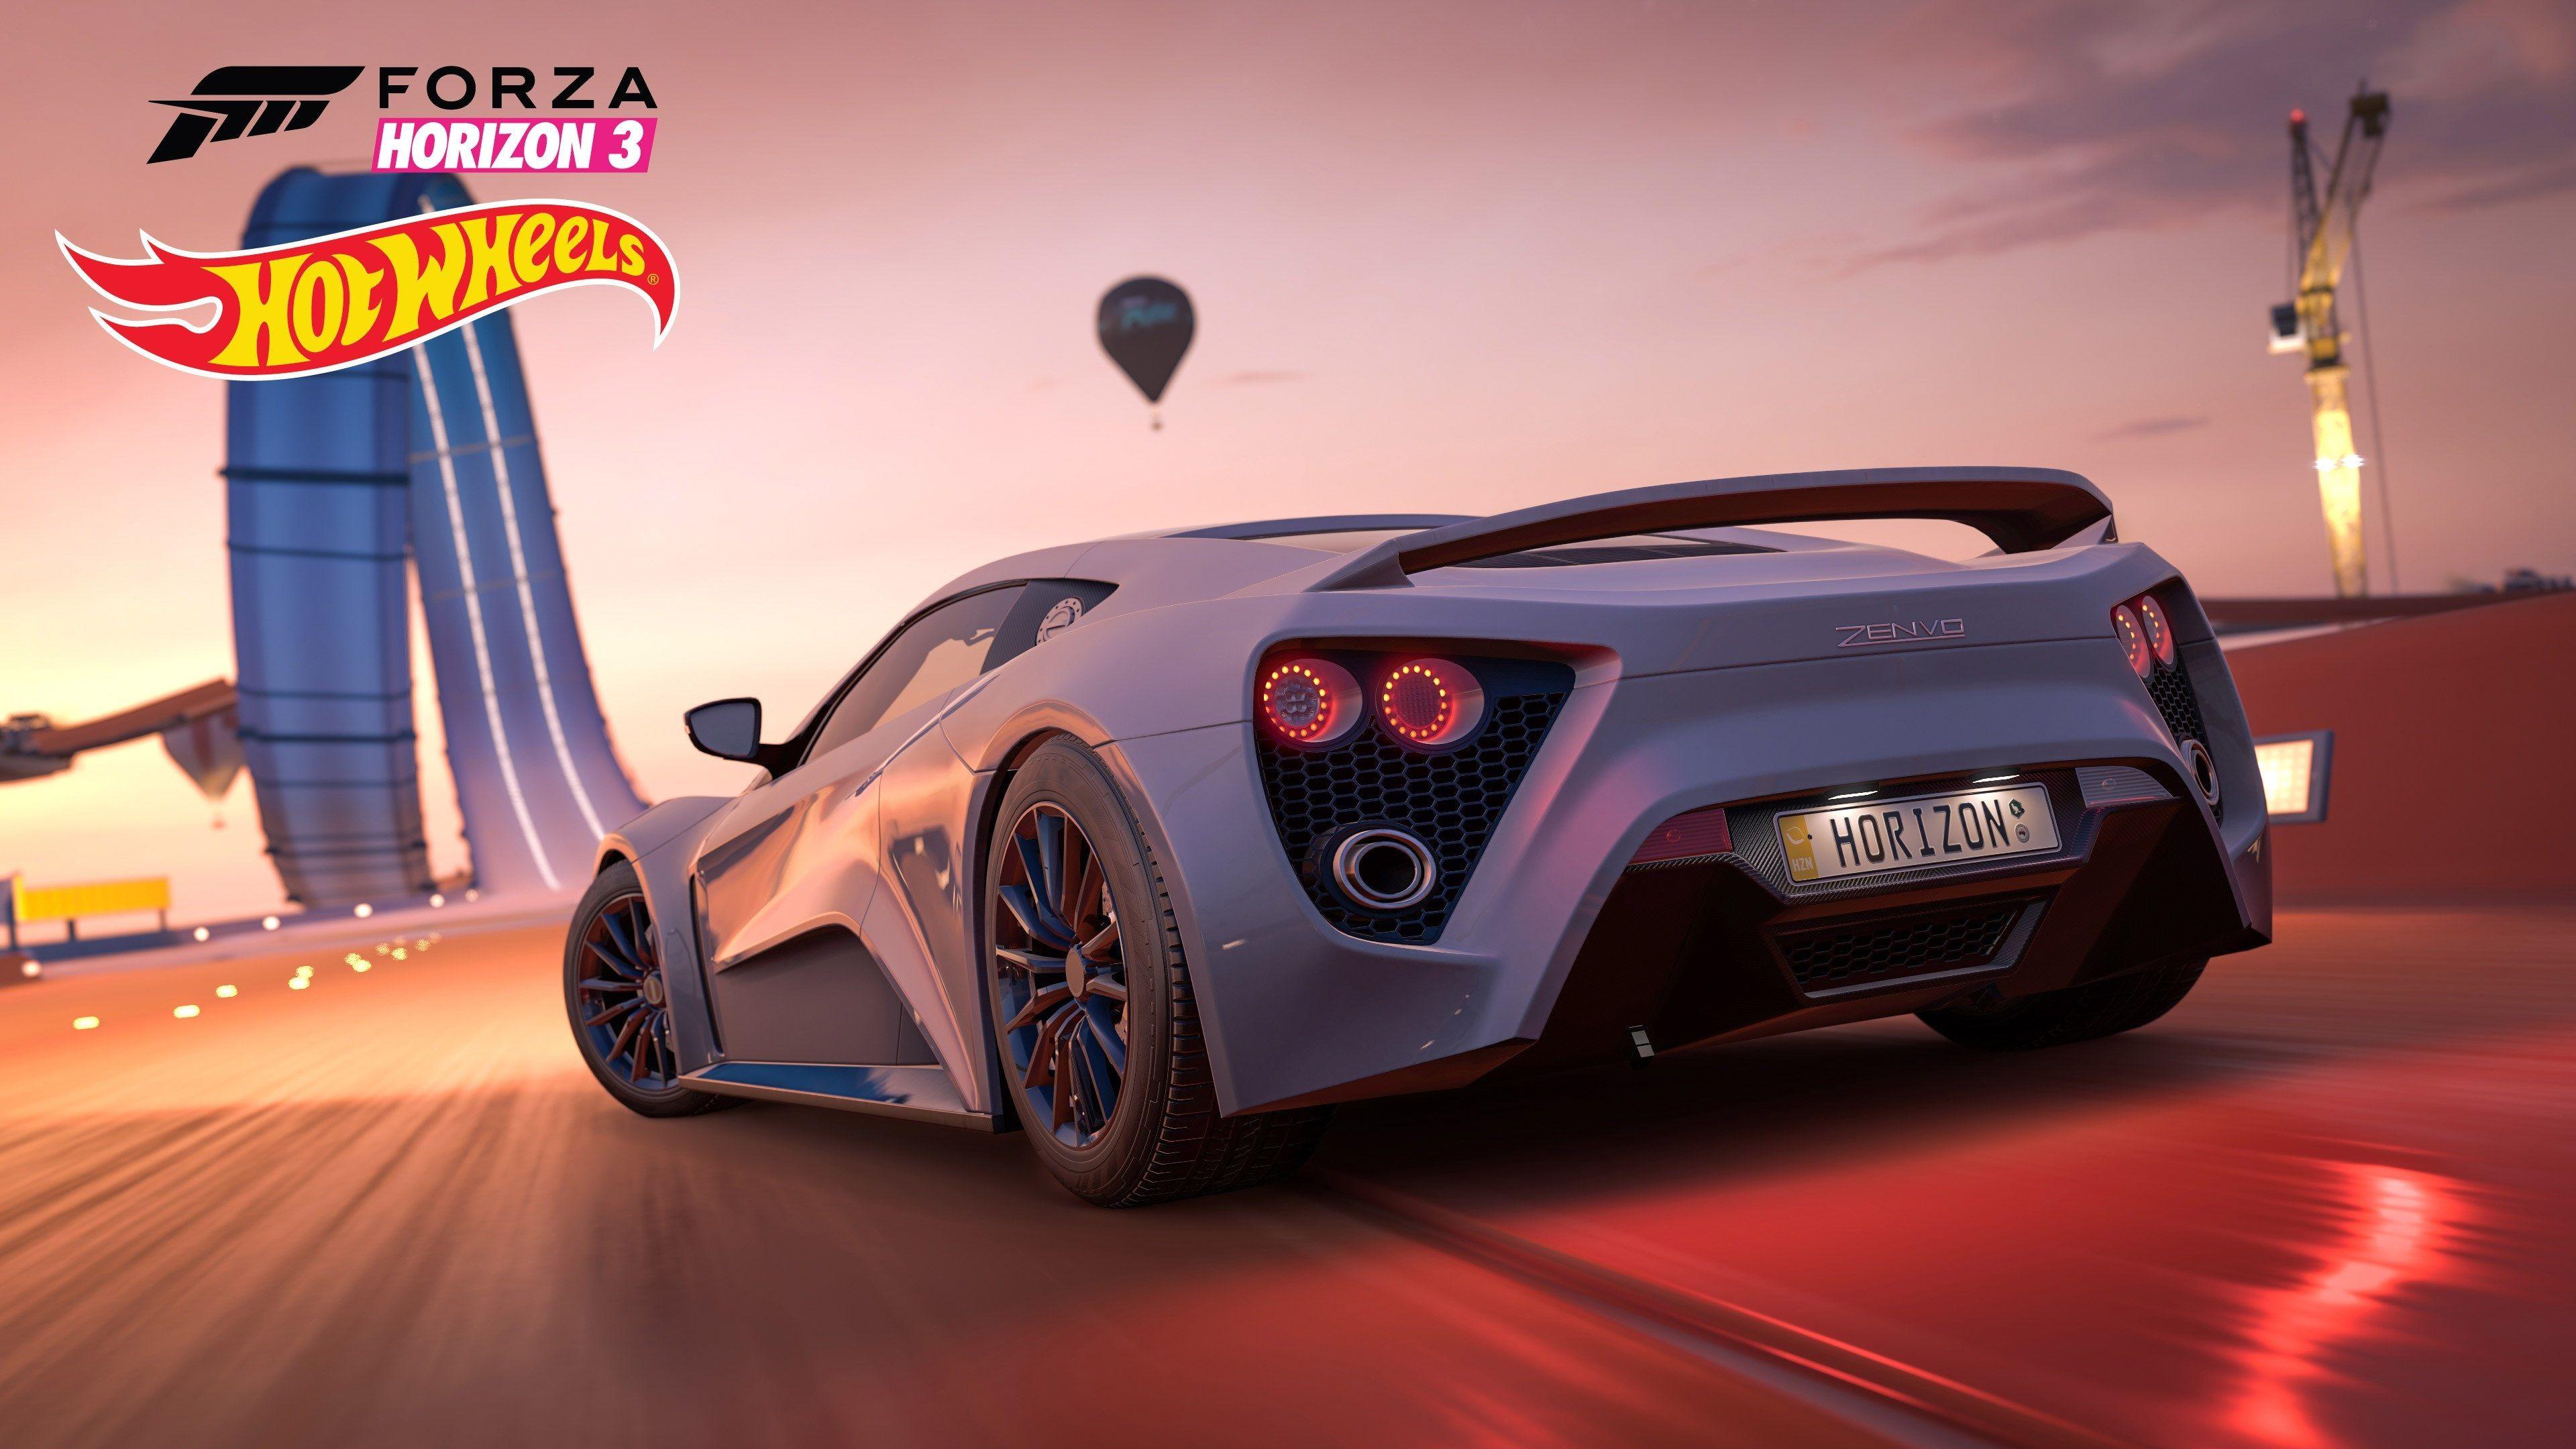 Forza horizon 3 wallpaper by 7itech - Download on ZEDGE™